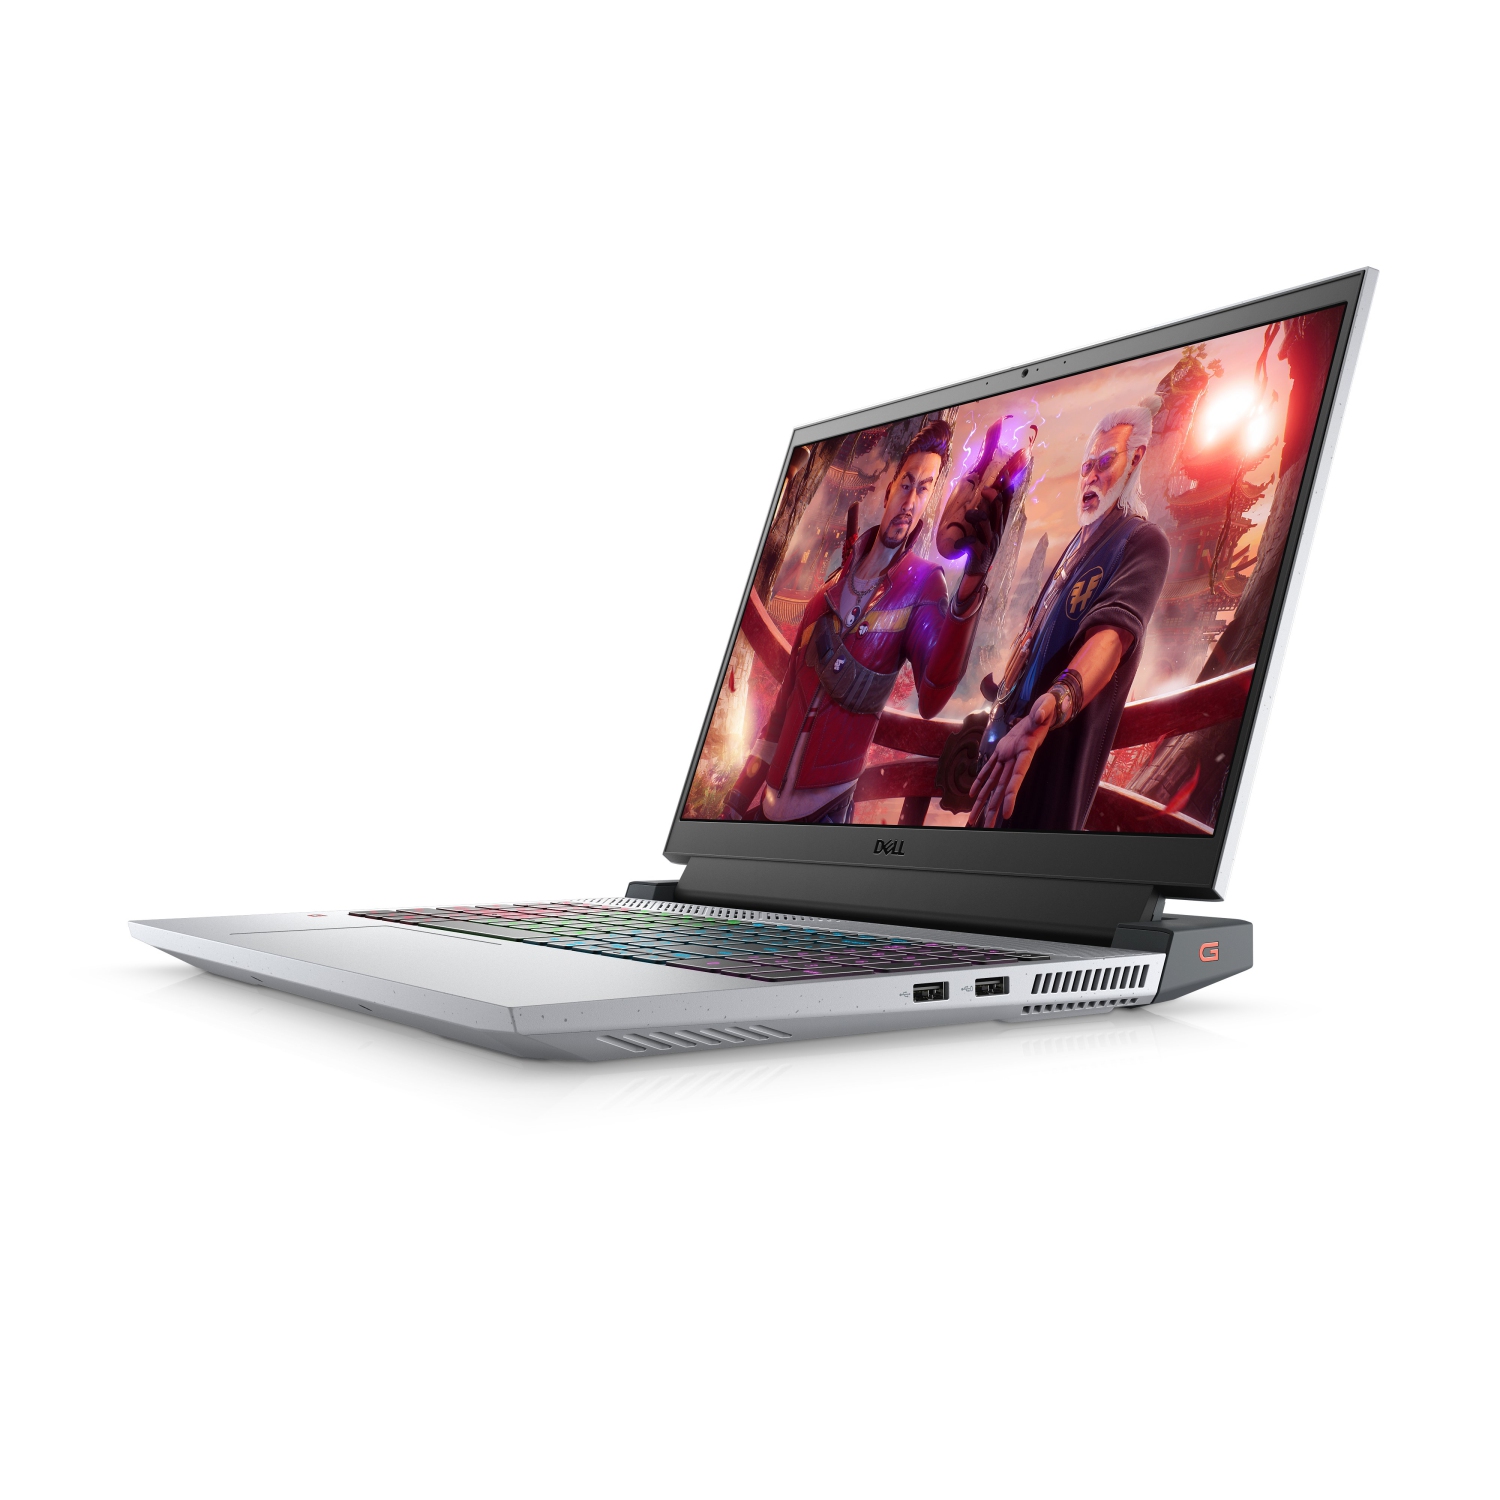 Refurbished (Excellent) – Dell G15 5515 Gaming Laptop (2021) | 15.6" FHD | Core Ryzen 7 - 512GB SSD - 16GB RAM - RTX 3060 | 8 Cores @ 4.4 GHz - 6GB GDDR6